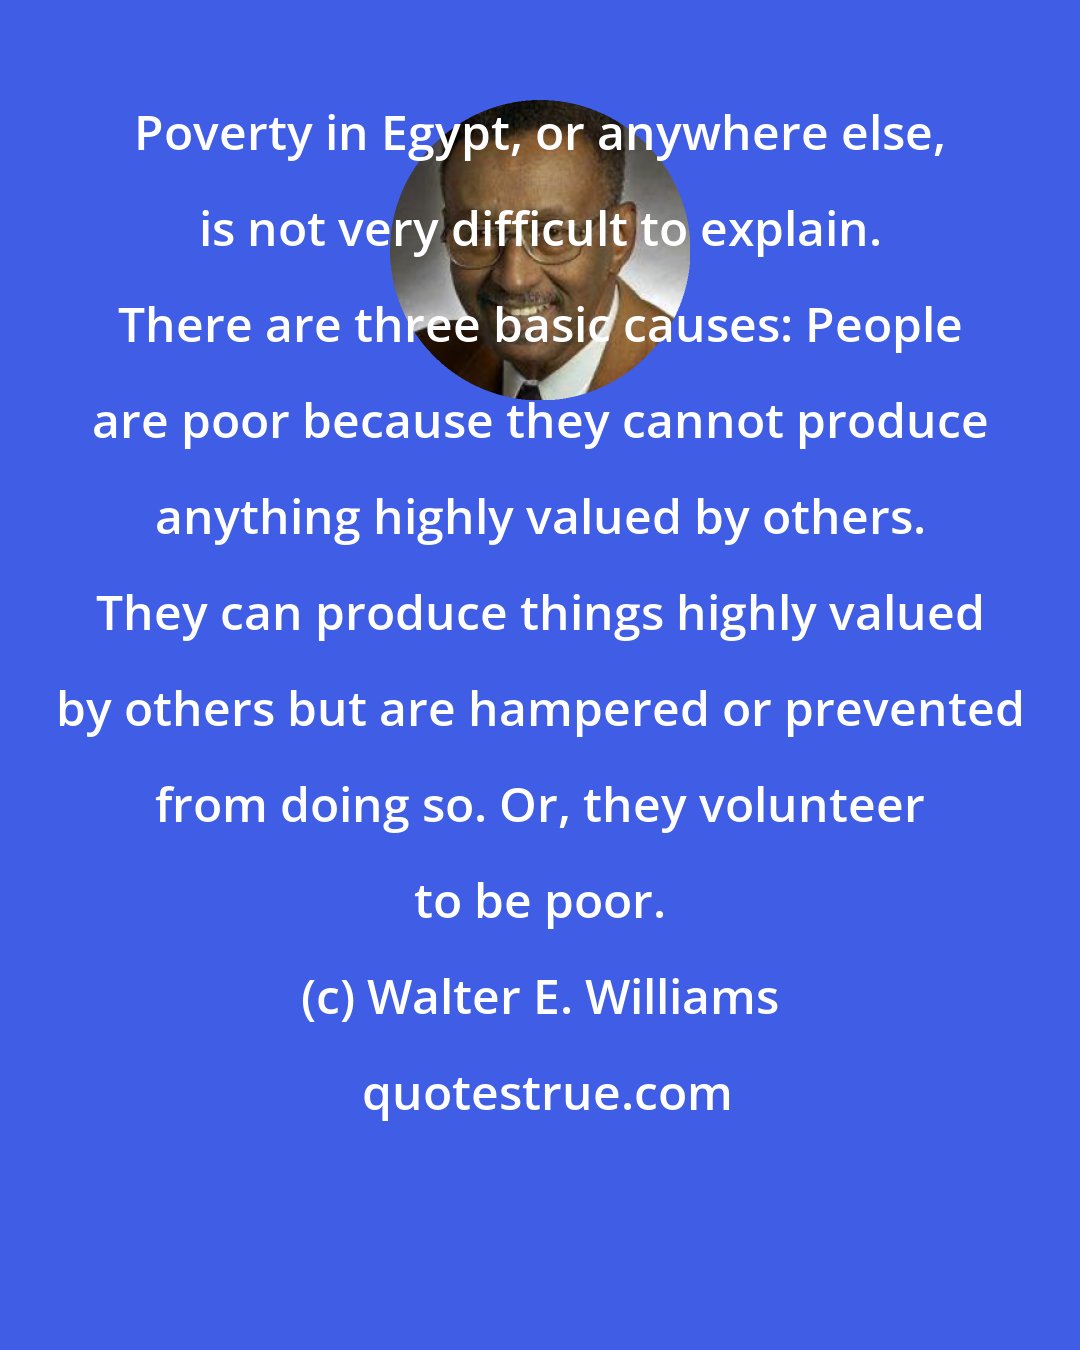 Walter E. Williams: Poverty in Egypt, or anywhere else, is not very difficult to explain. There are three basic causes: People are poor because they cannot produce anything highly valued by others. They can produce things highly valued by others but are hampered or prevented from doing so. Or, they volunteer to be poor.